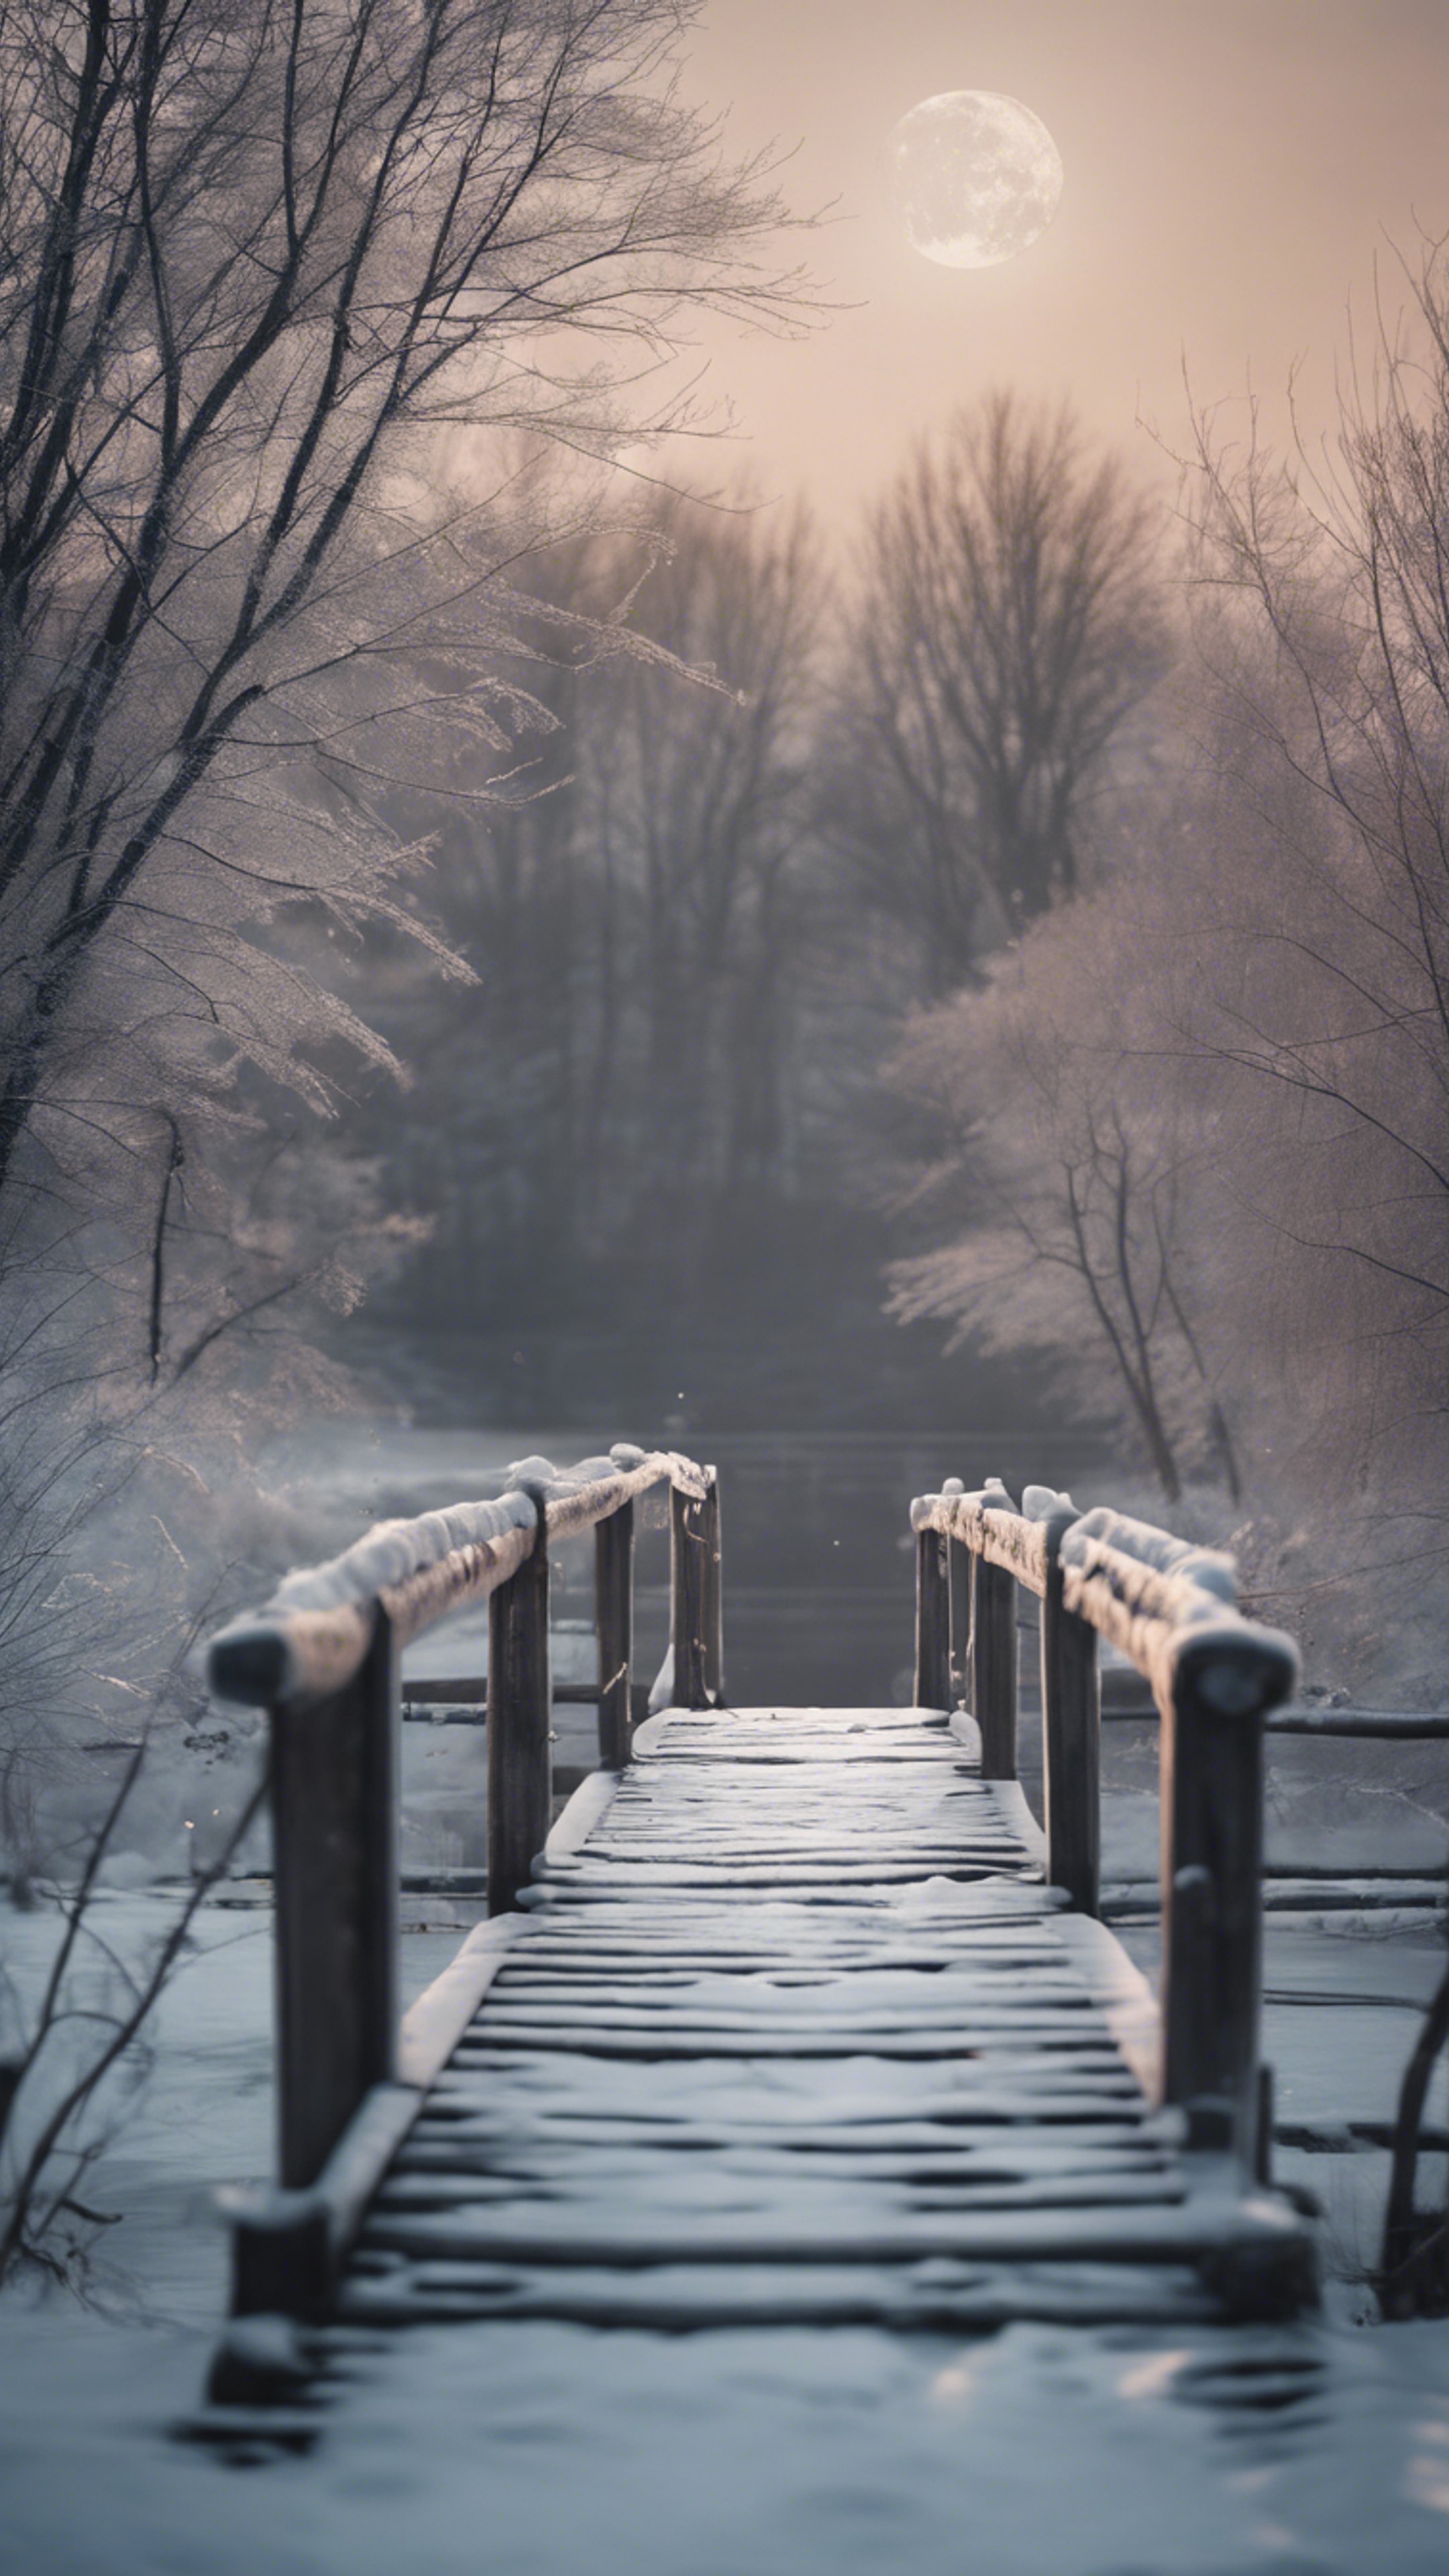 A rustic wooden bridge spanning a frozen river, with the winter moon being reflected on its icy surface. Wallpaper[c0758b61140a45abaa8d]